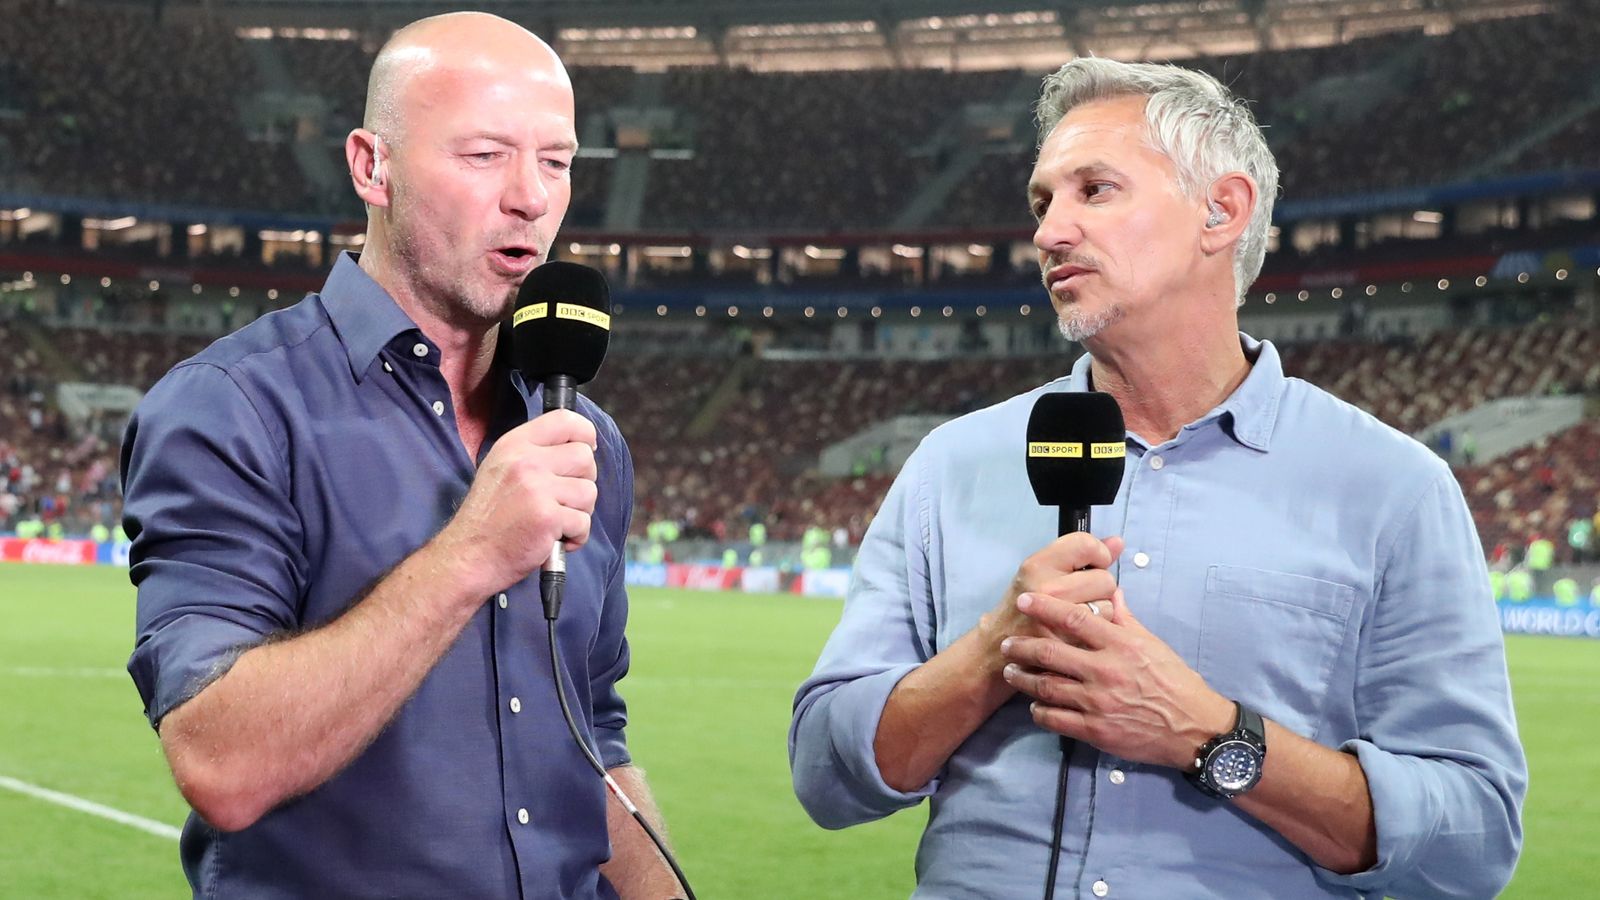 Match of the Day to go ahead without presenters, pundits or BBC commentators after Lineker removed